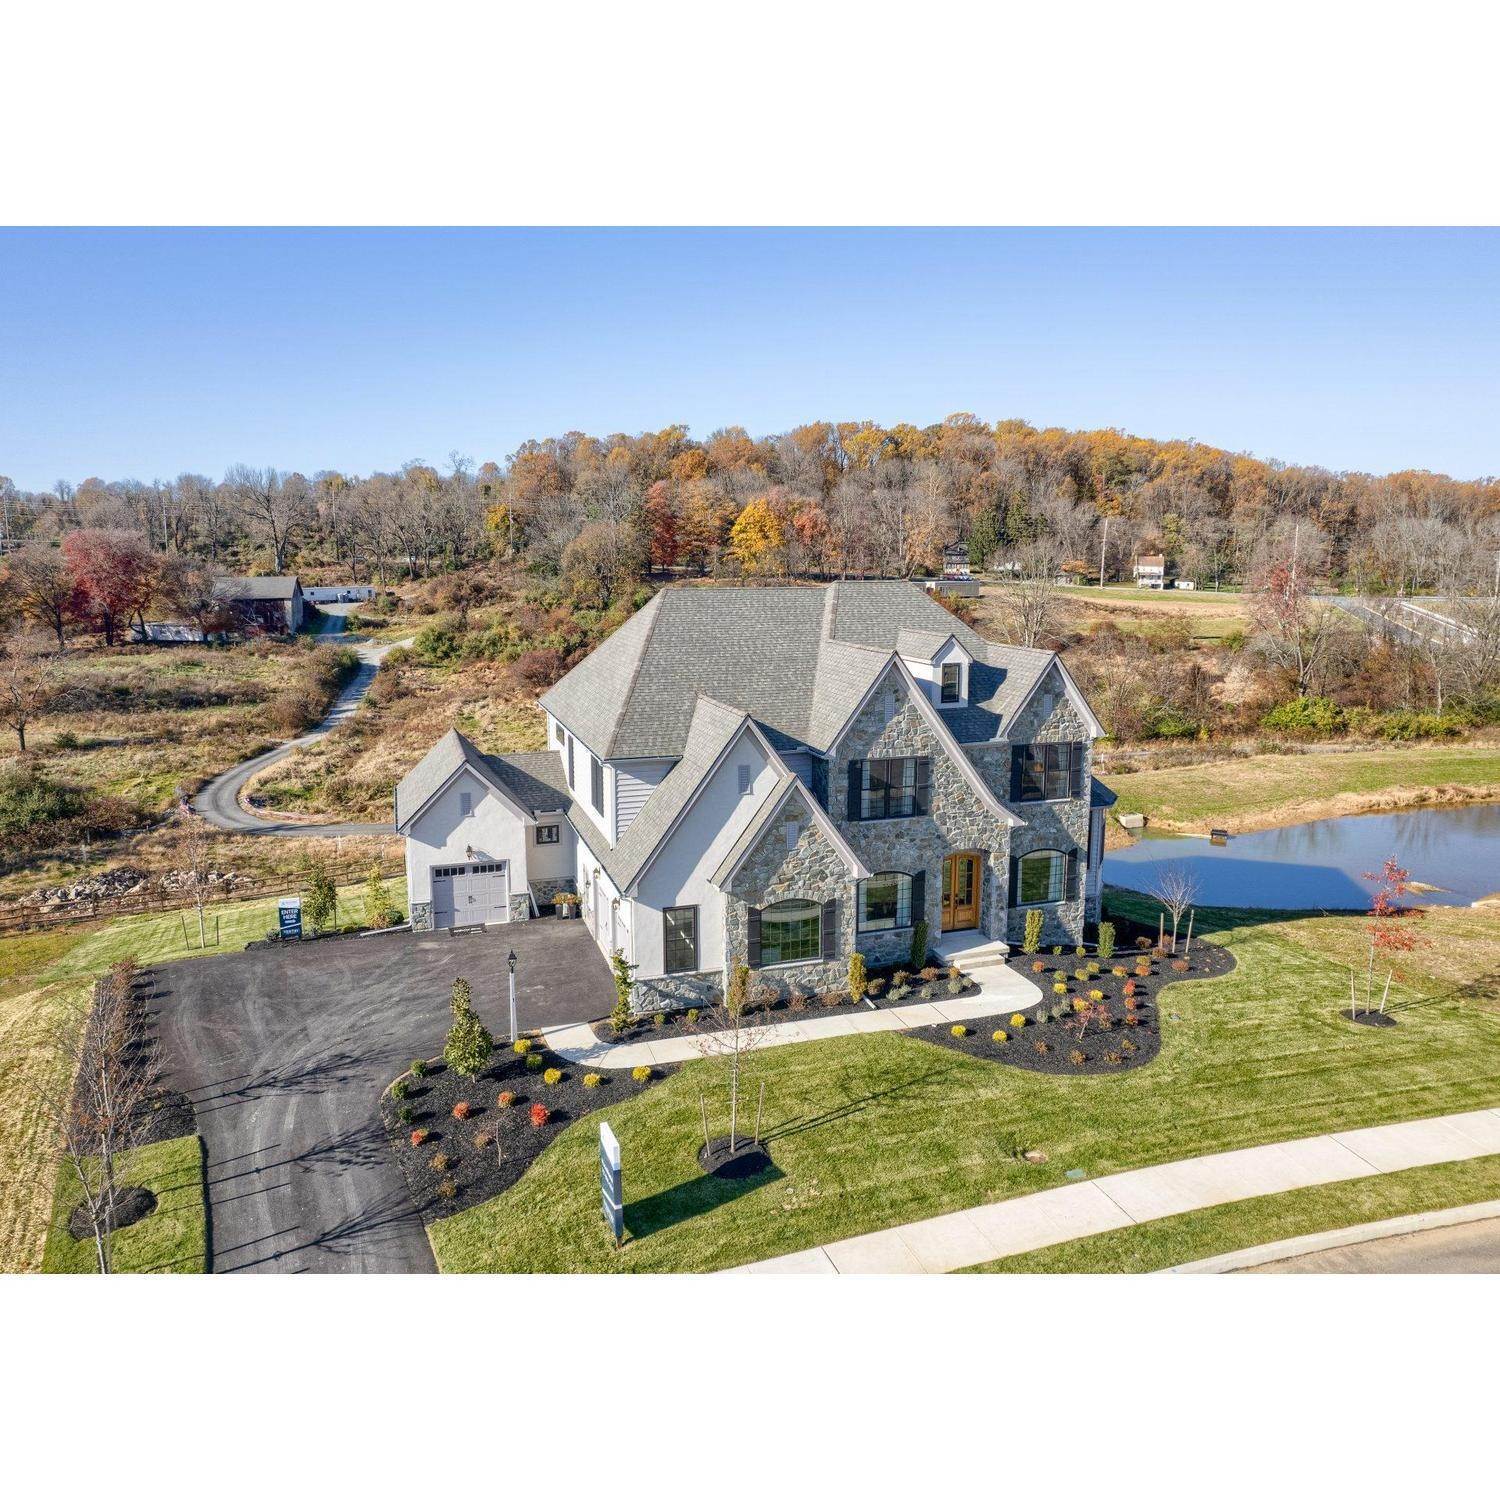 39. Ventry at Edgmont Preserve κτίριο σε 101 Parkview Way, Newtown Square, PA 19073